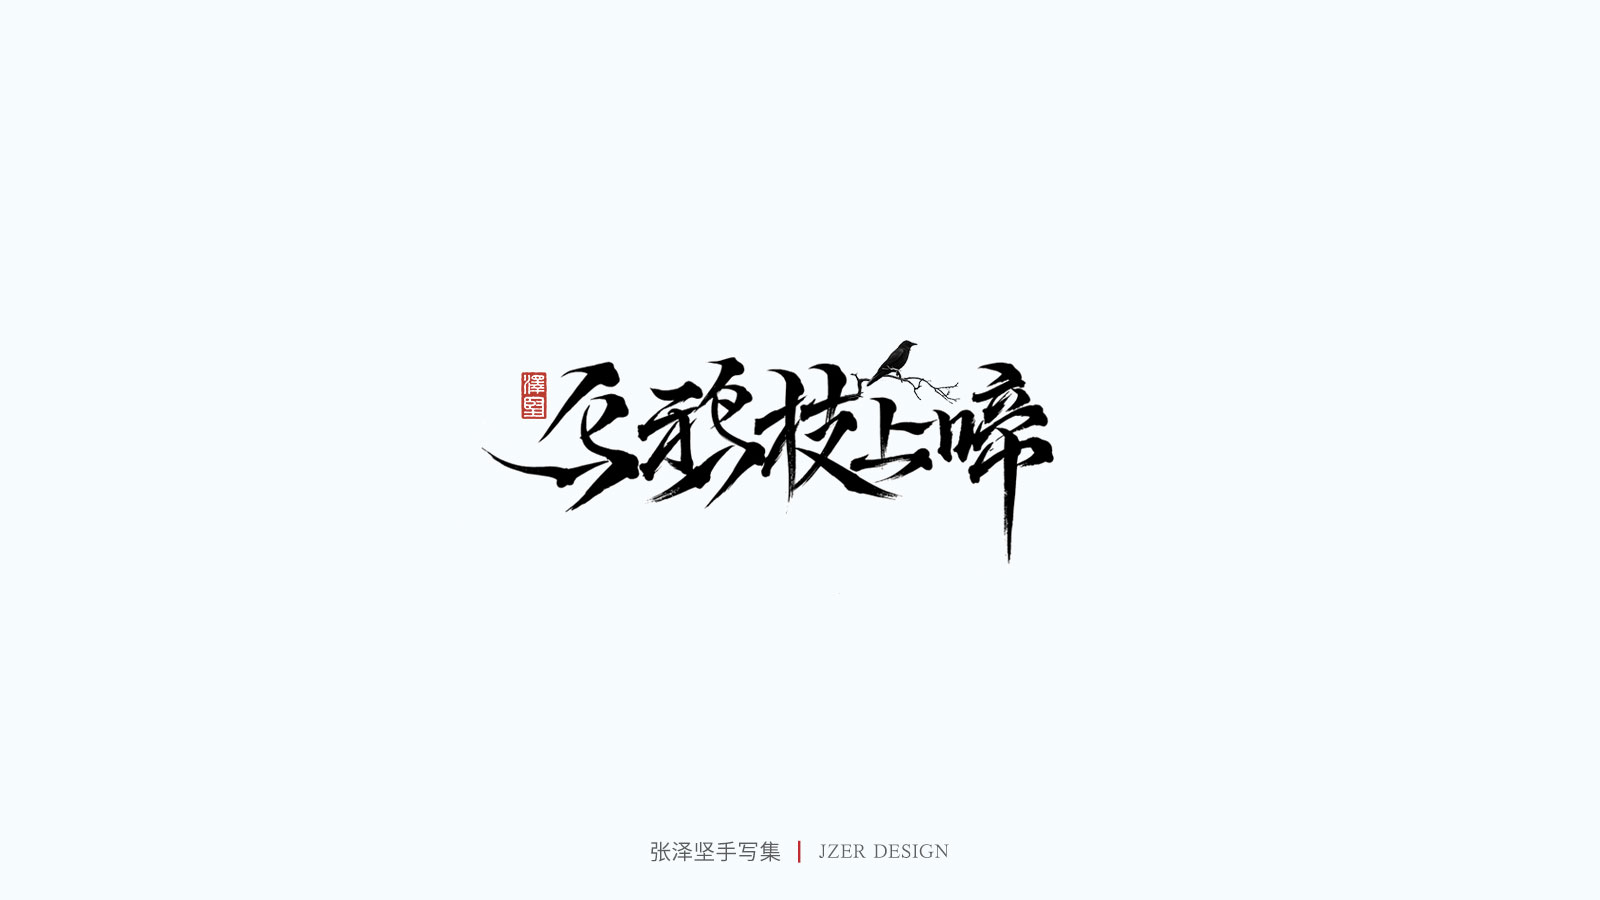 30P Collection of the latest Chinese font design schemes in 2021 #.89